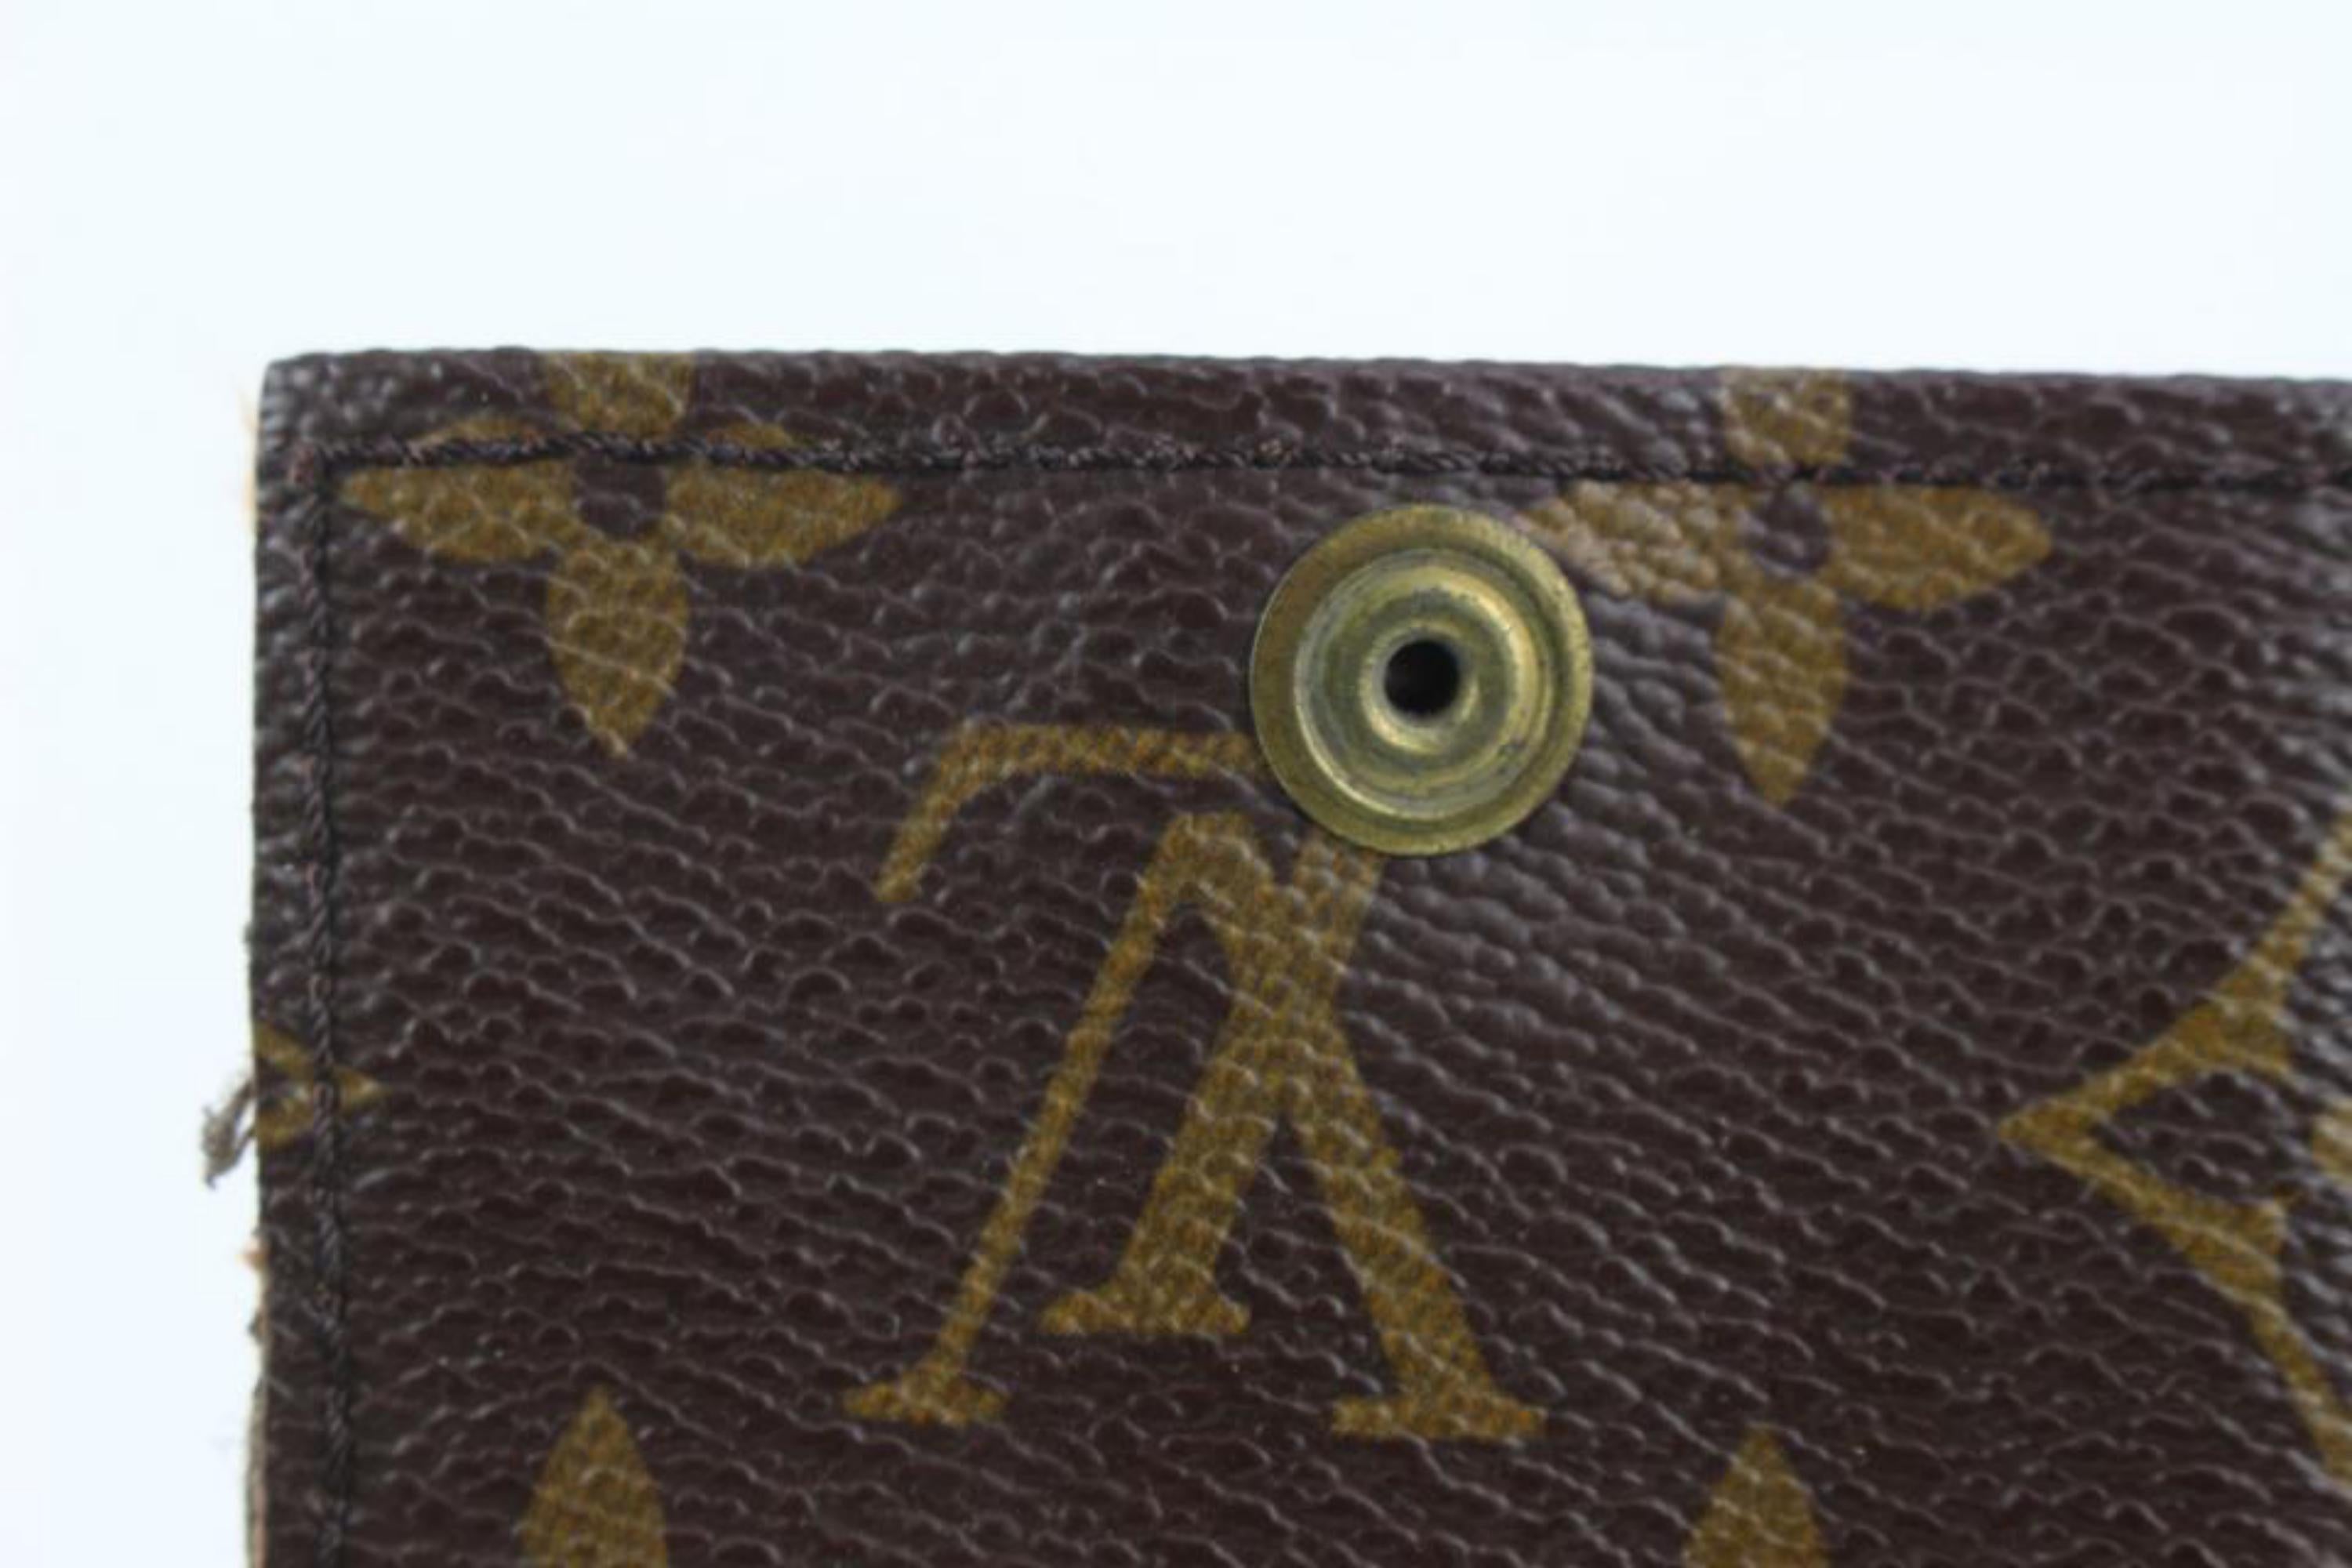 Louis Vuitton Monogram Randonnee Insert Toiletry Pouch 1213lv4 In Good Condition For Sale In Dix hills, NY